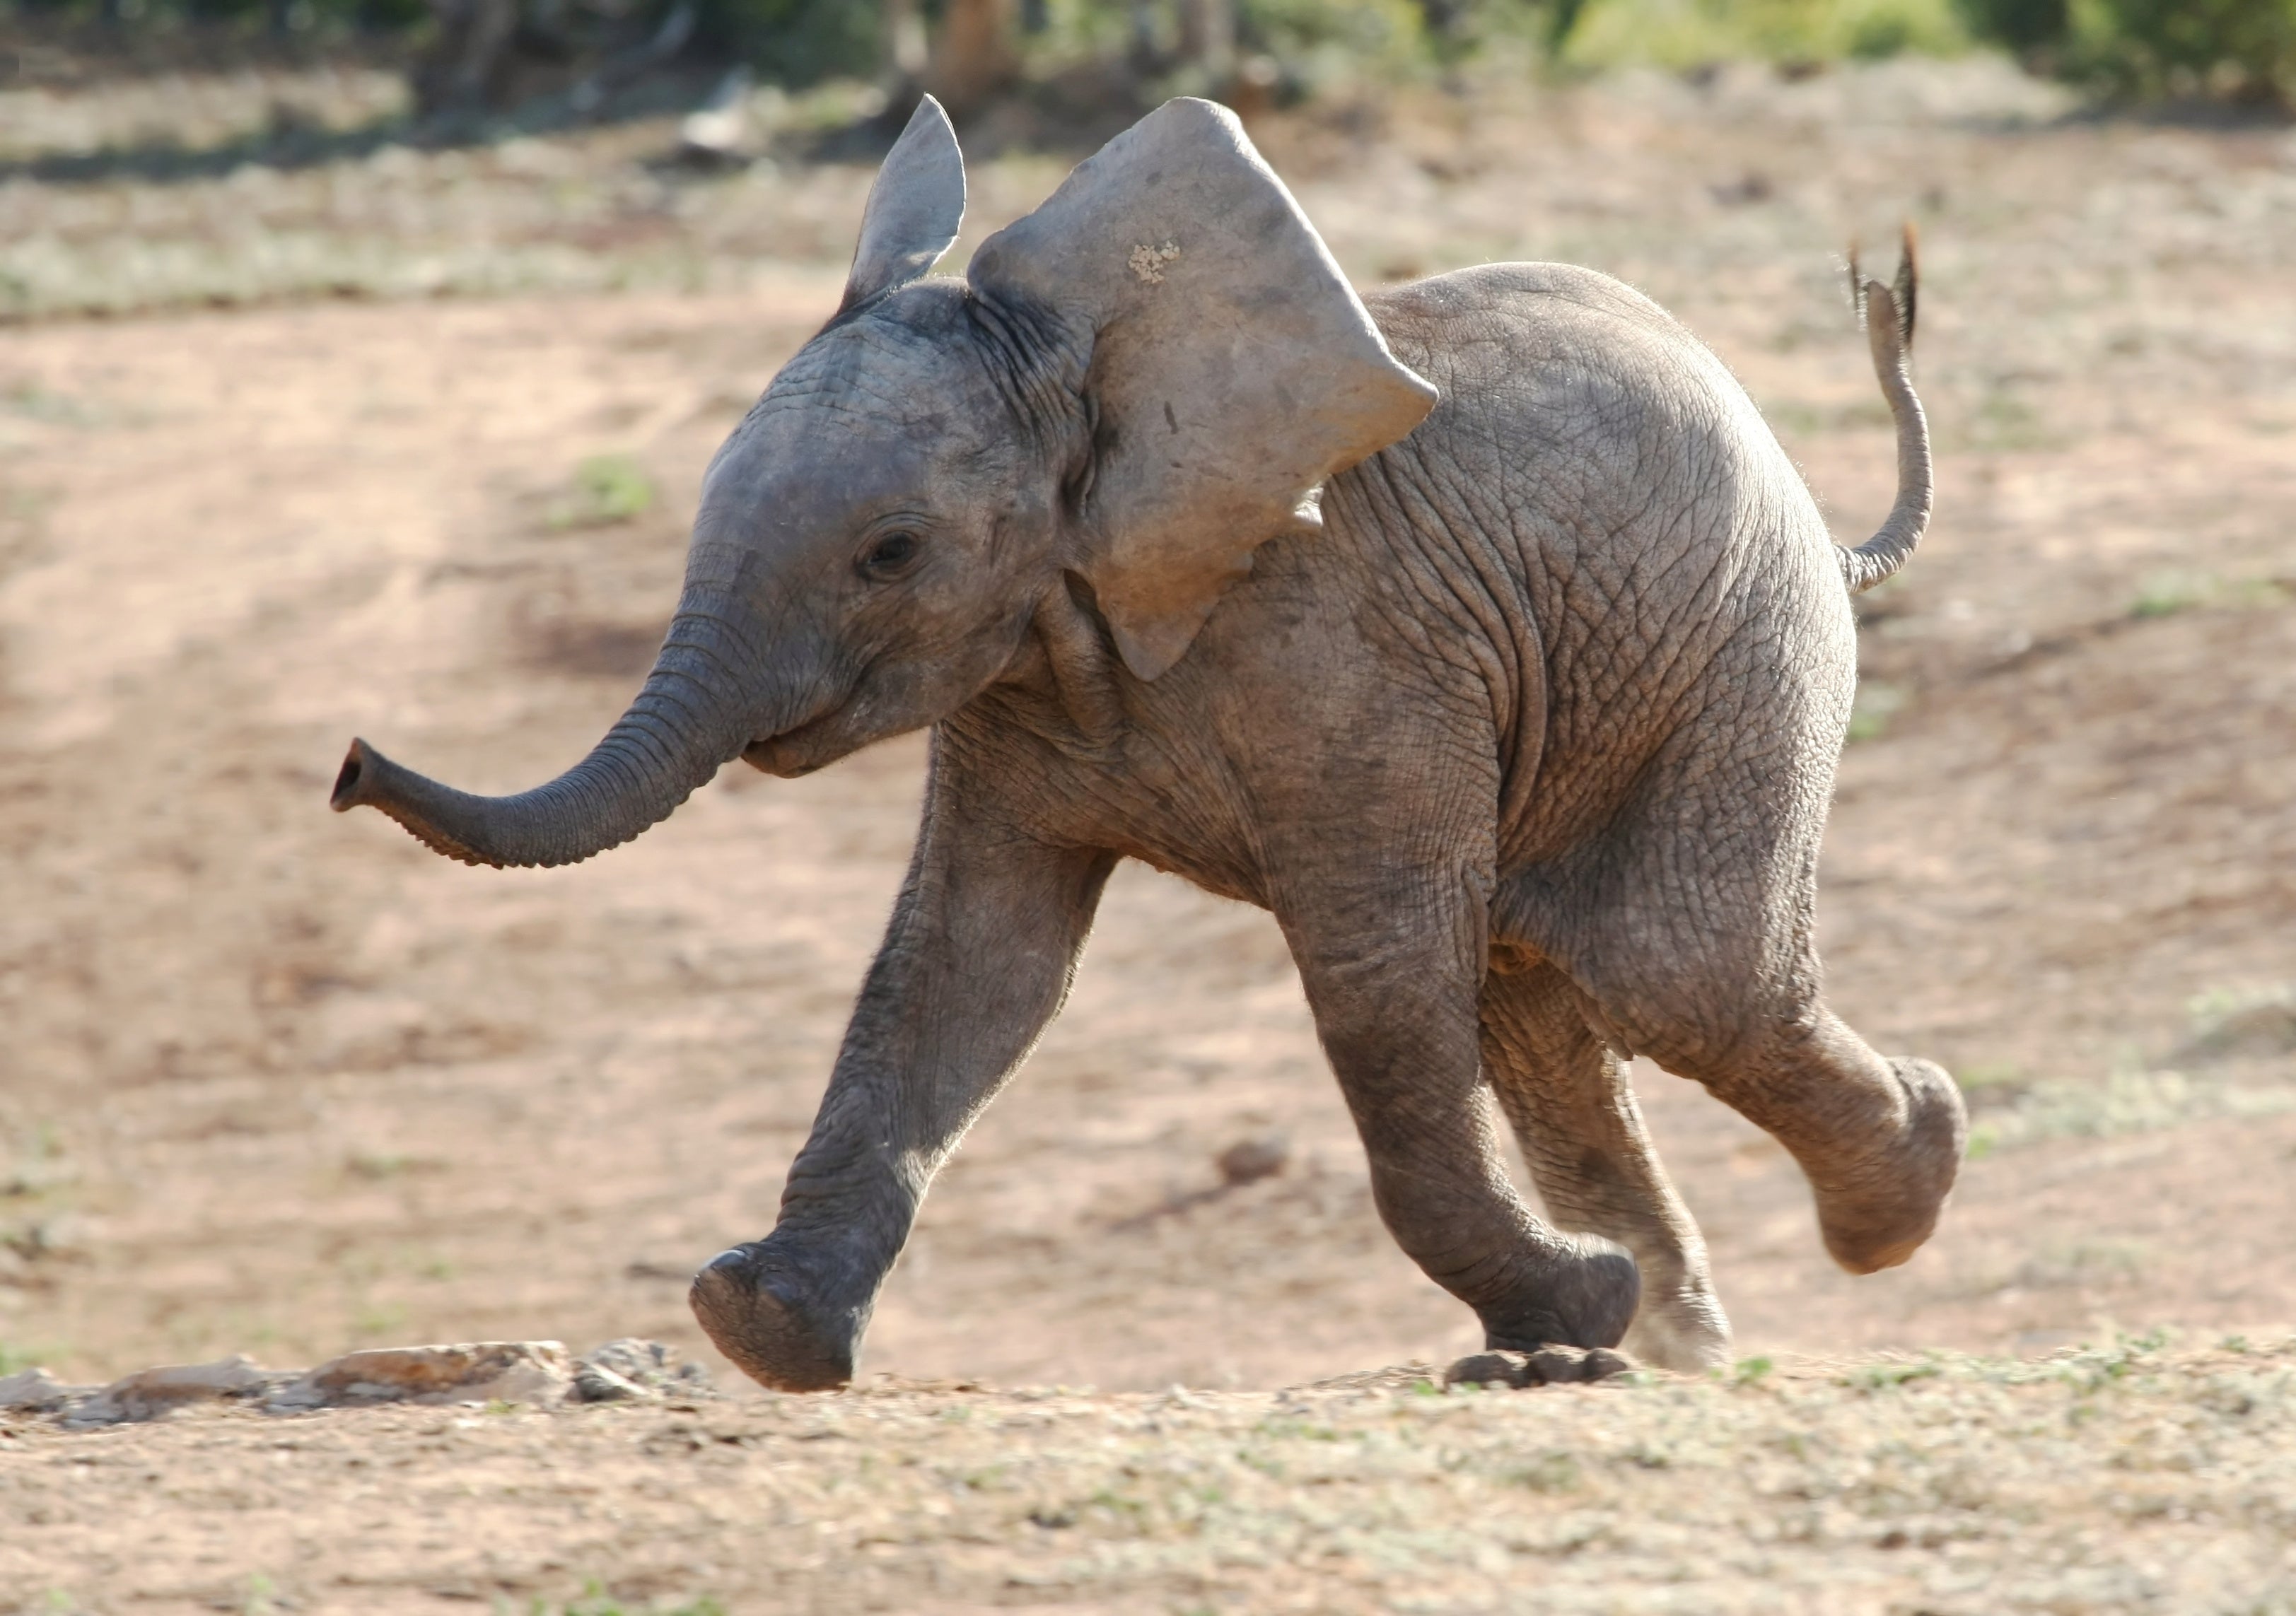 Baby elephant running and playing